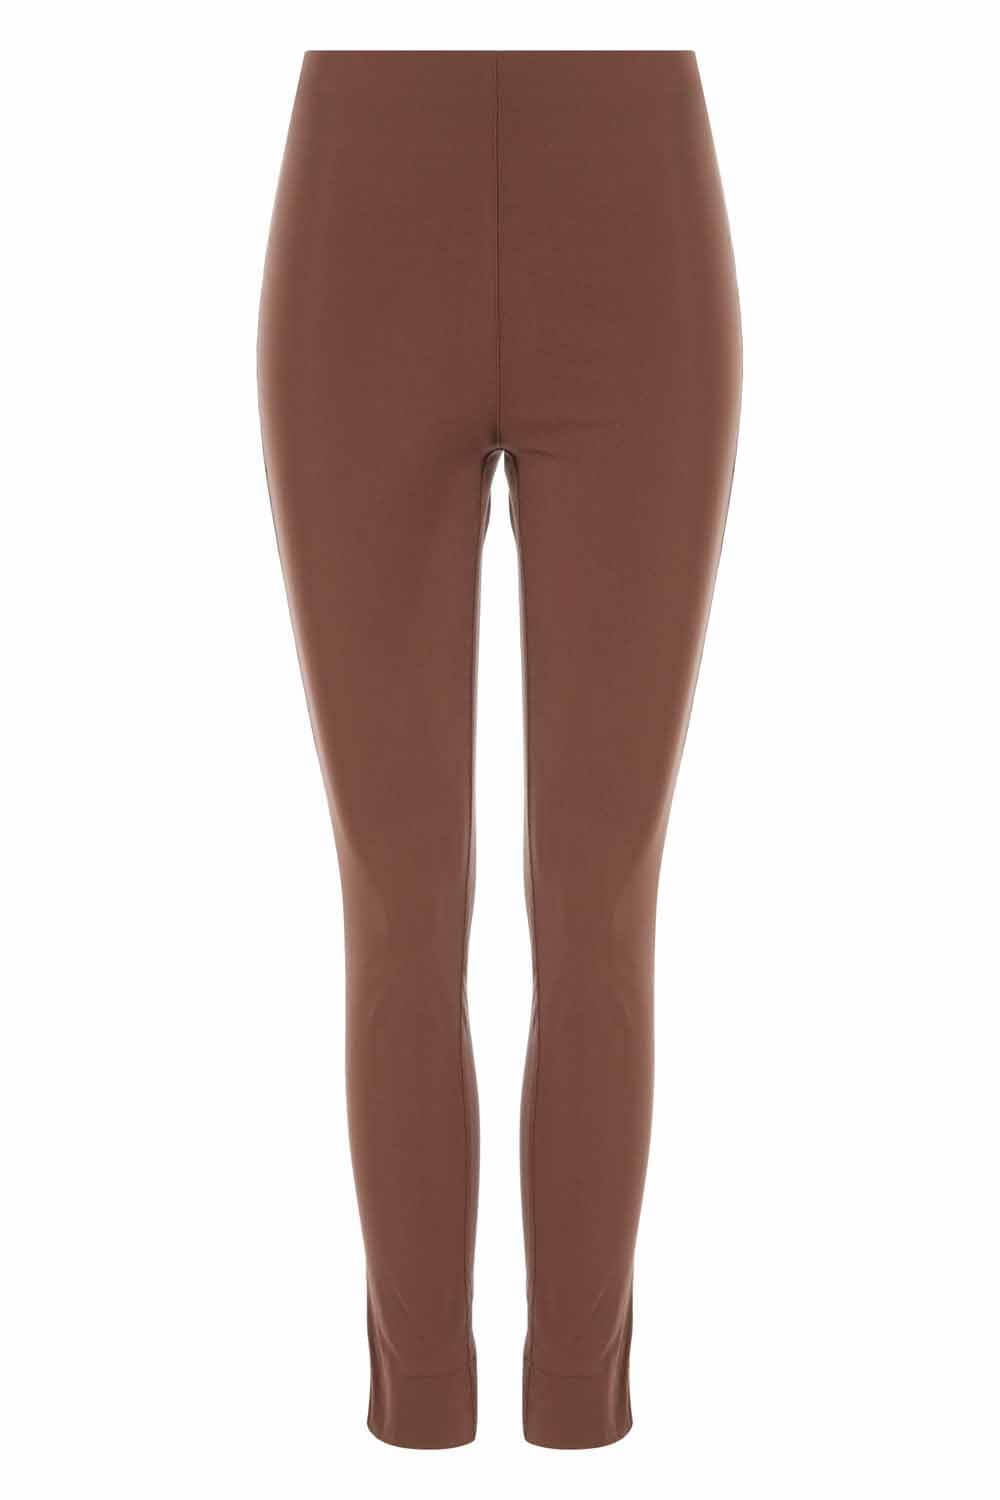 Brown Full Length Stretch Trousers, Image 5 of 5